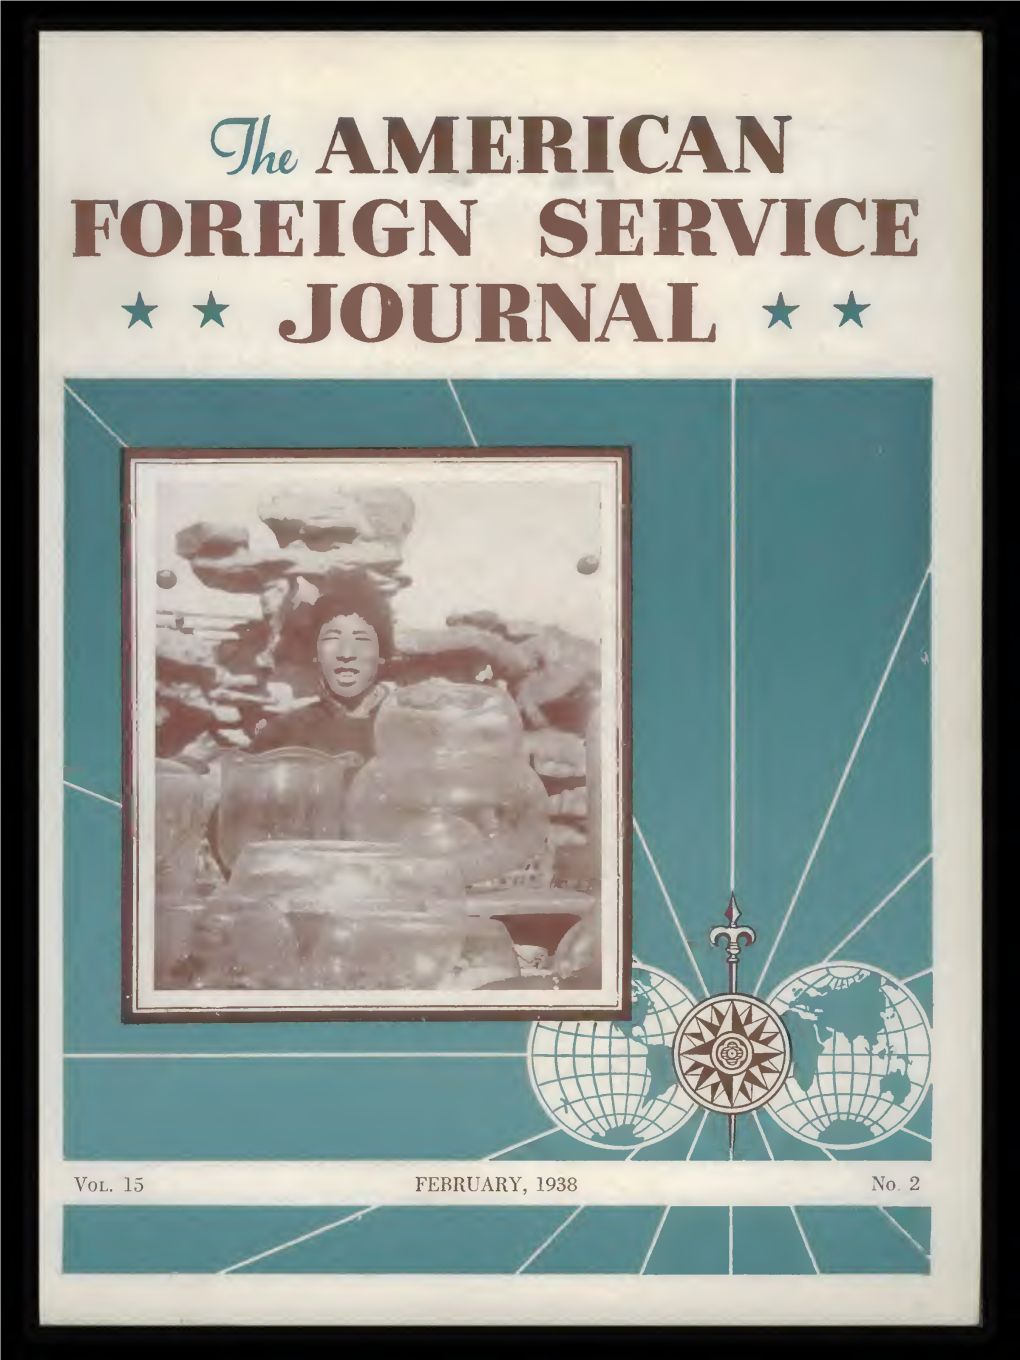 The Foreign Service Journal, February 1938